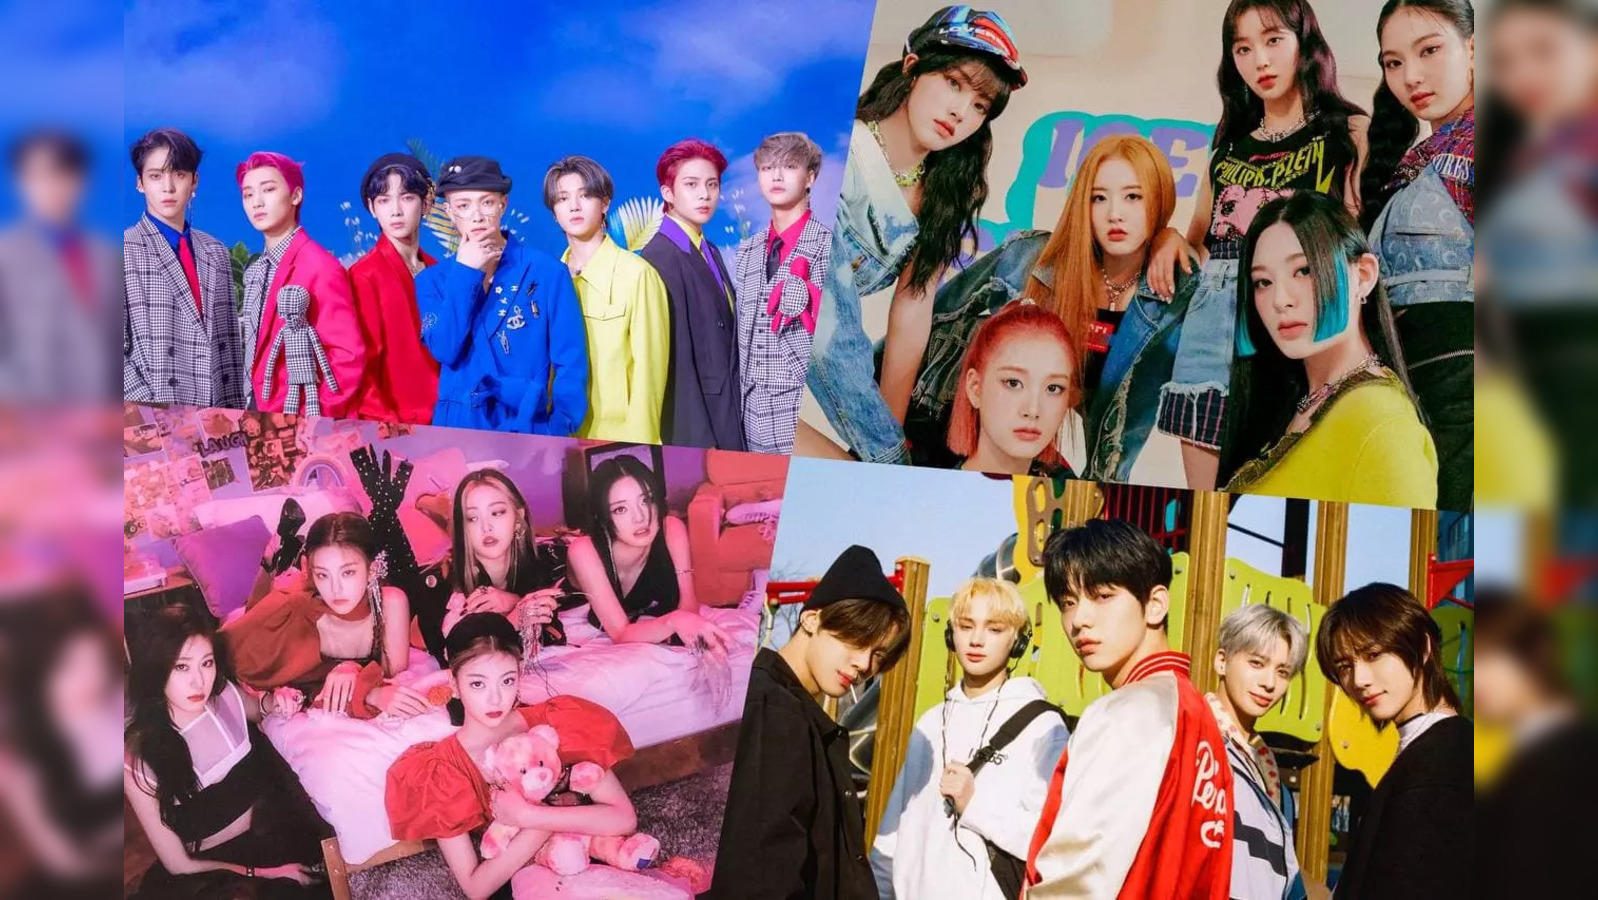 Who do you like the most/which K-pop group is better and why, NCT